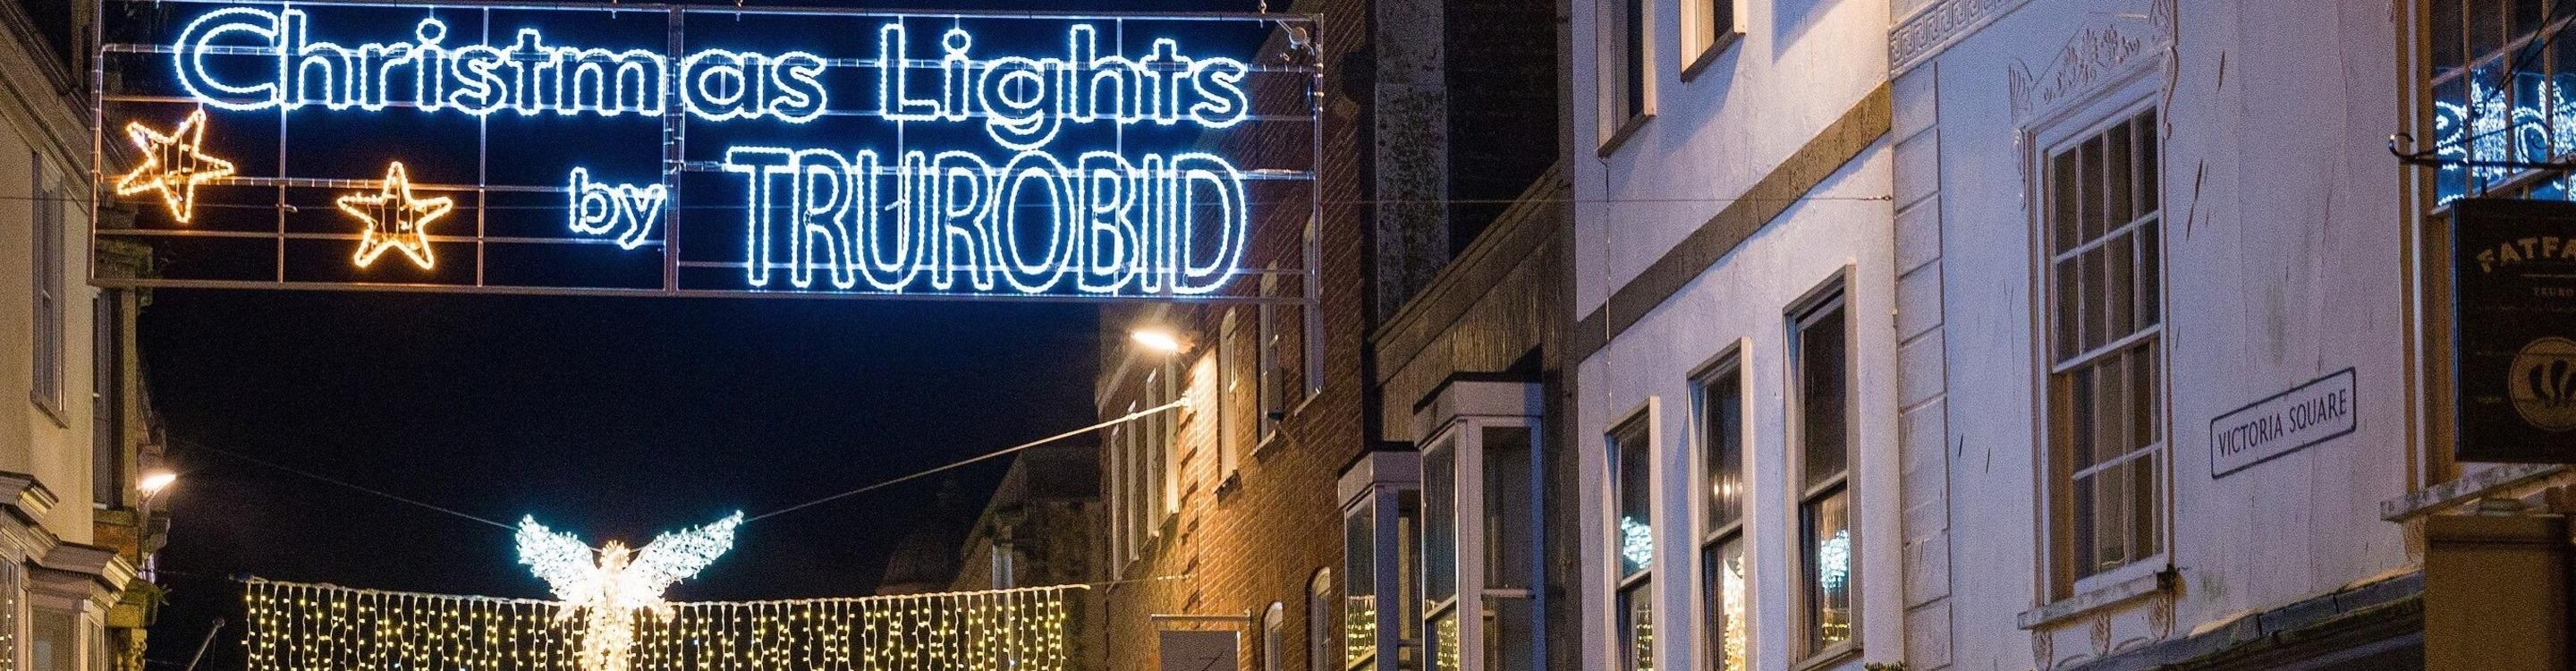 A Christmas light display over Victoria Square in Truro, showing the words 'Christmas Lights by TRUROBID'